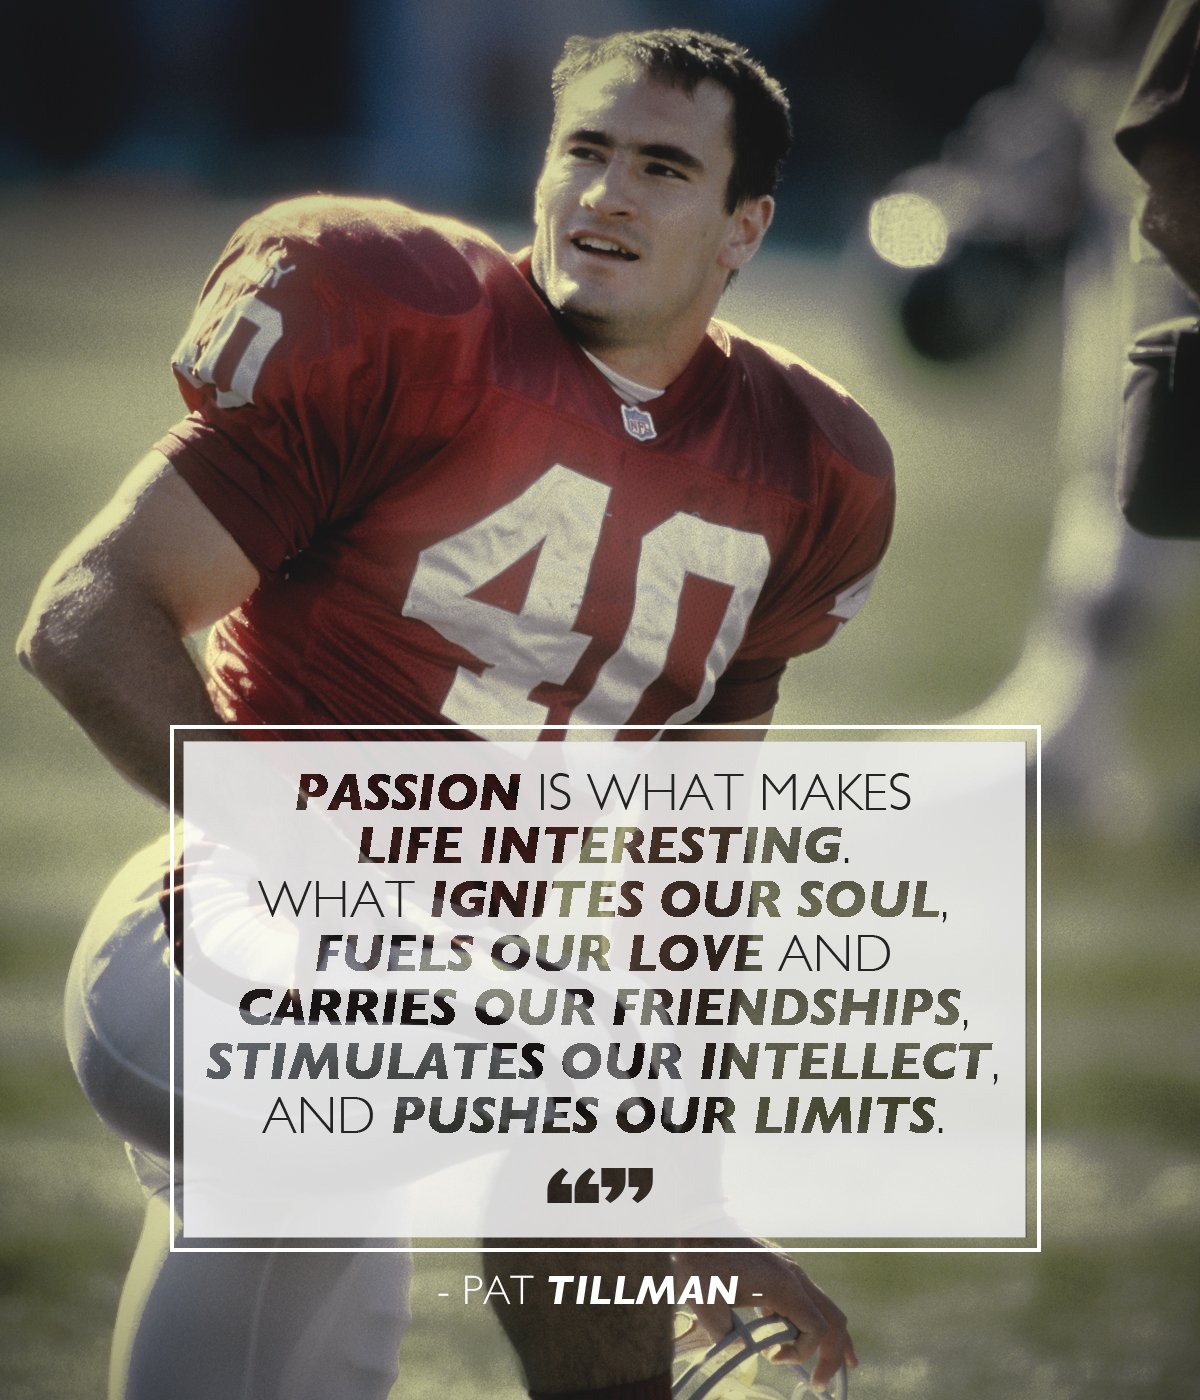 Pat Tillman's enduring message to his wife – East Bay Times